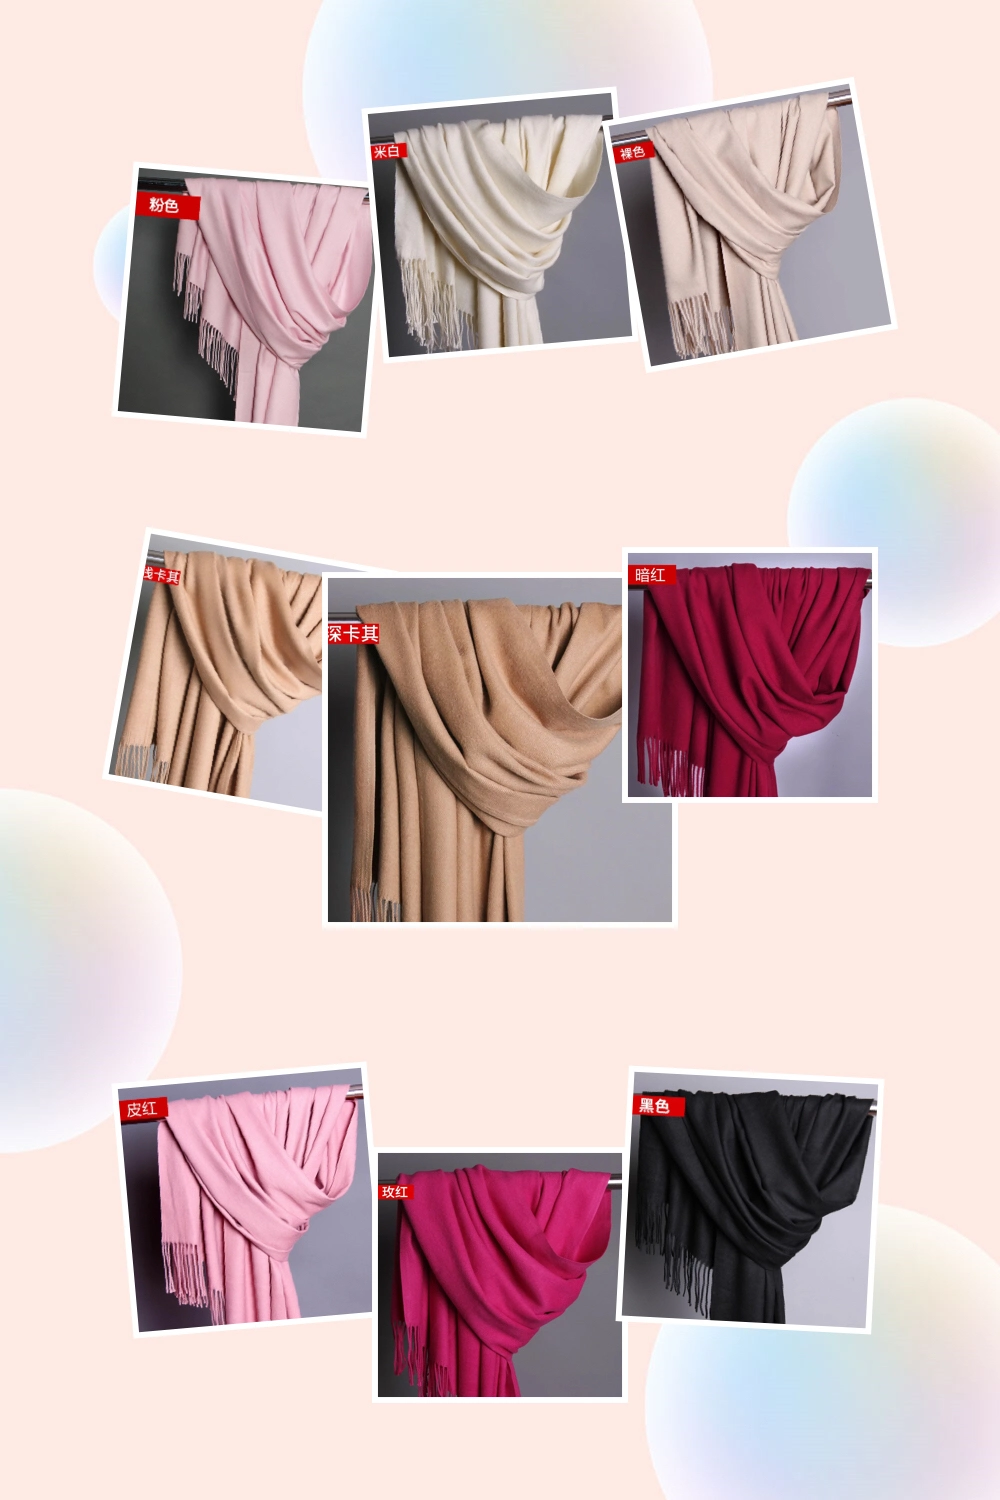 Imitate Cashmere Hand Feeling Large Woven Scarf in Many Solid Color